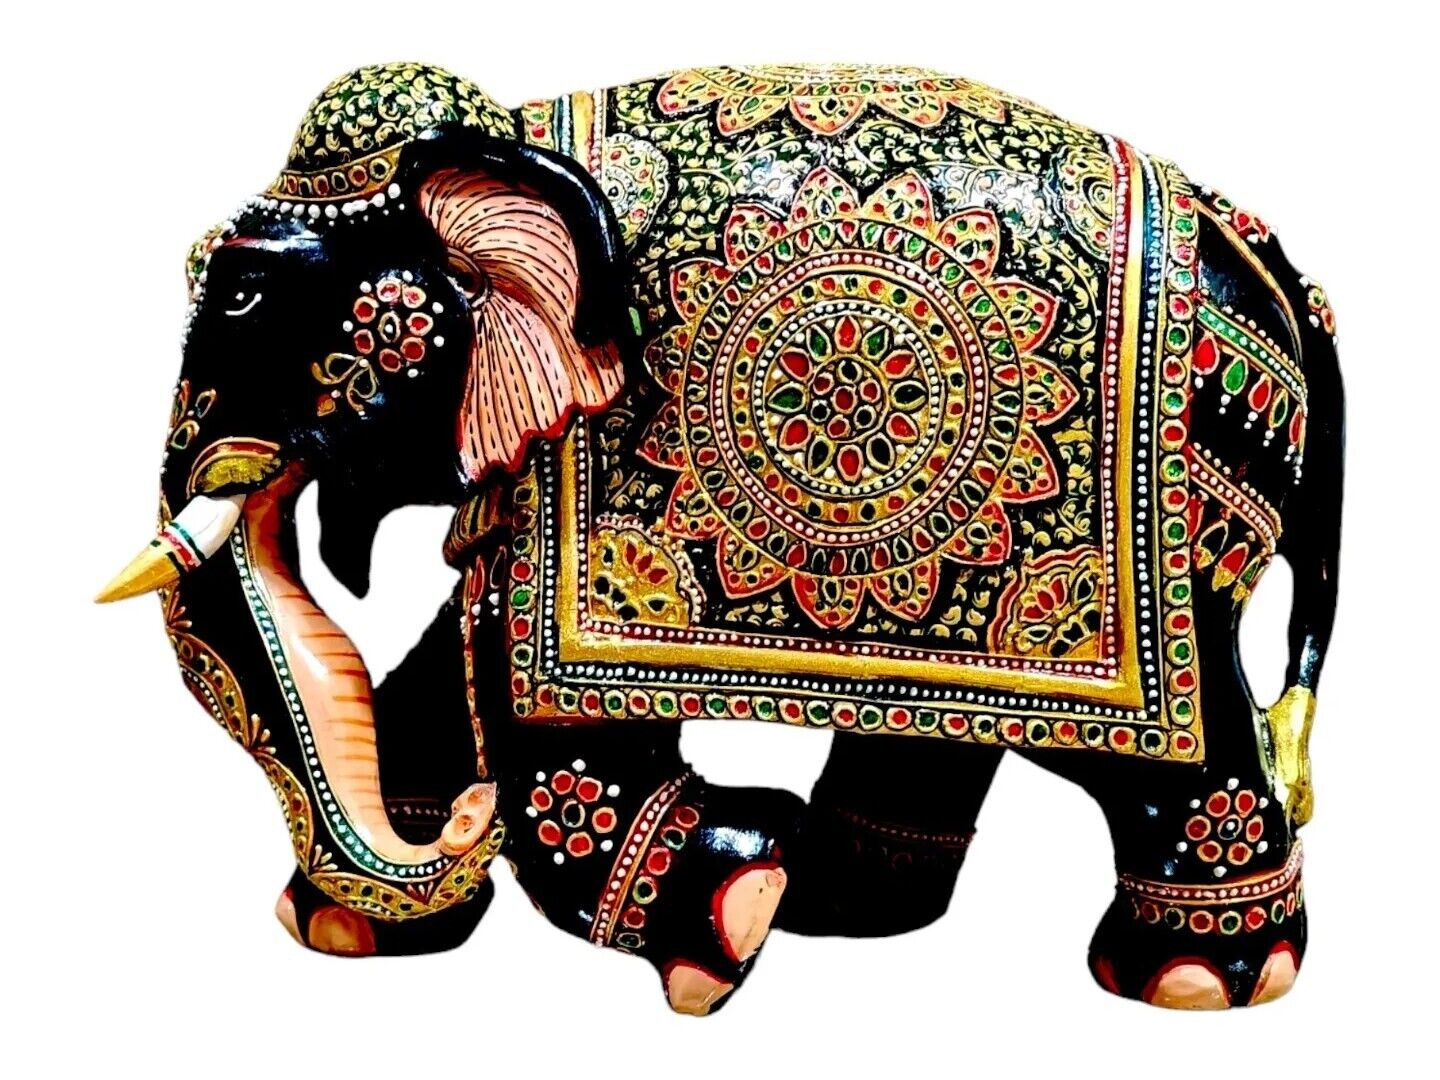 Wooden Painted Elephant Statue Decorative Hand Painted Elephant Figure Height 17